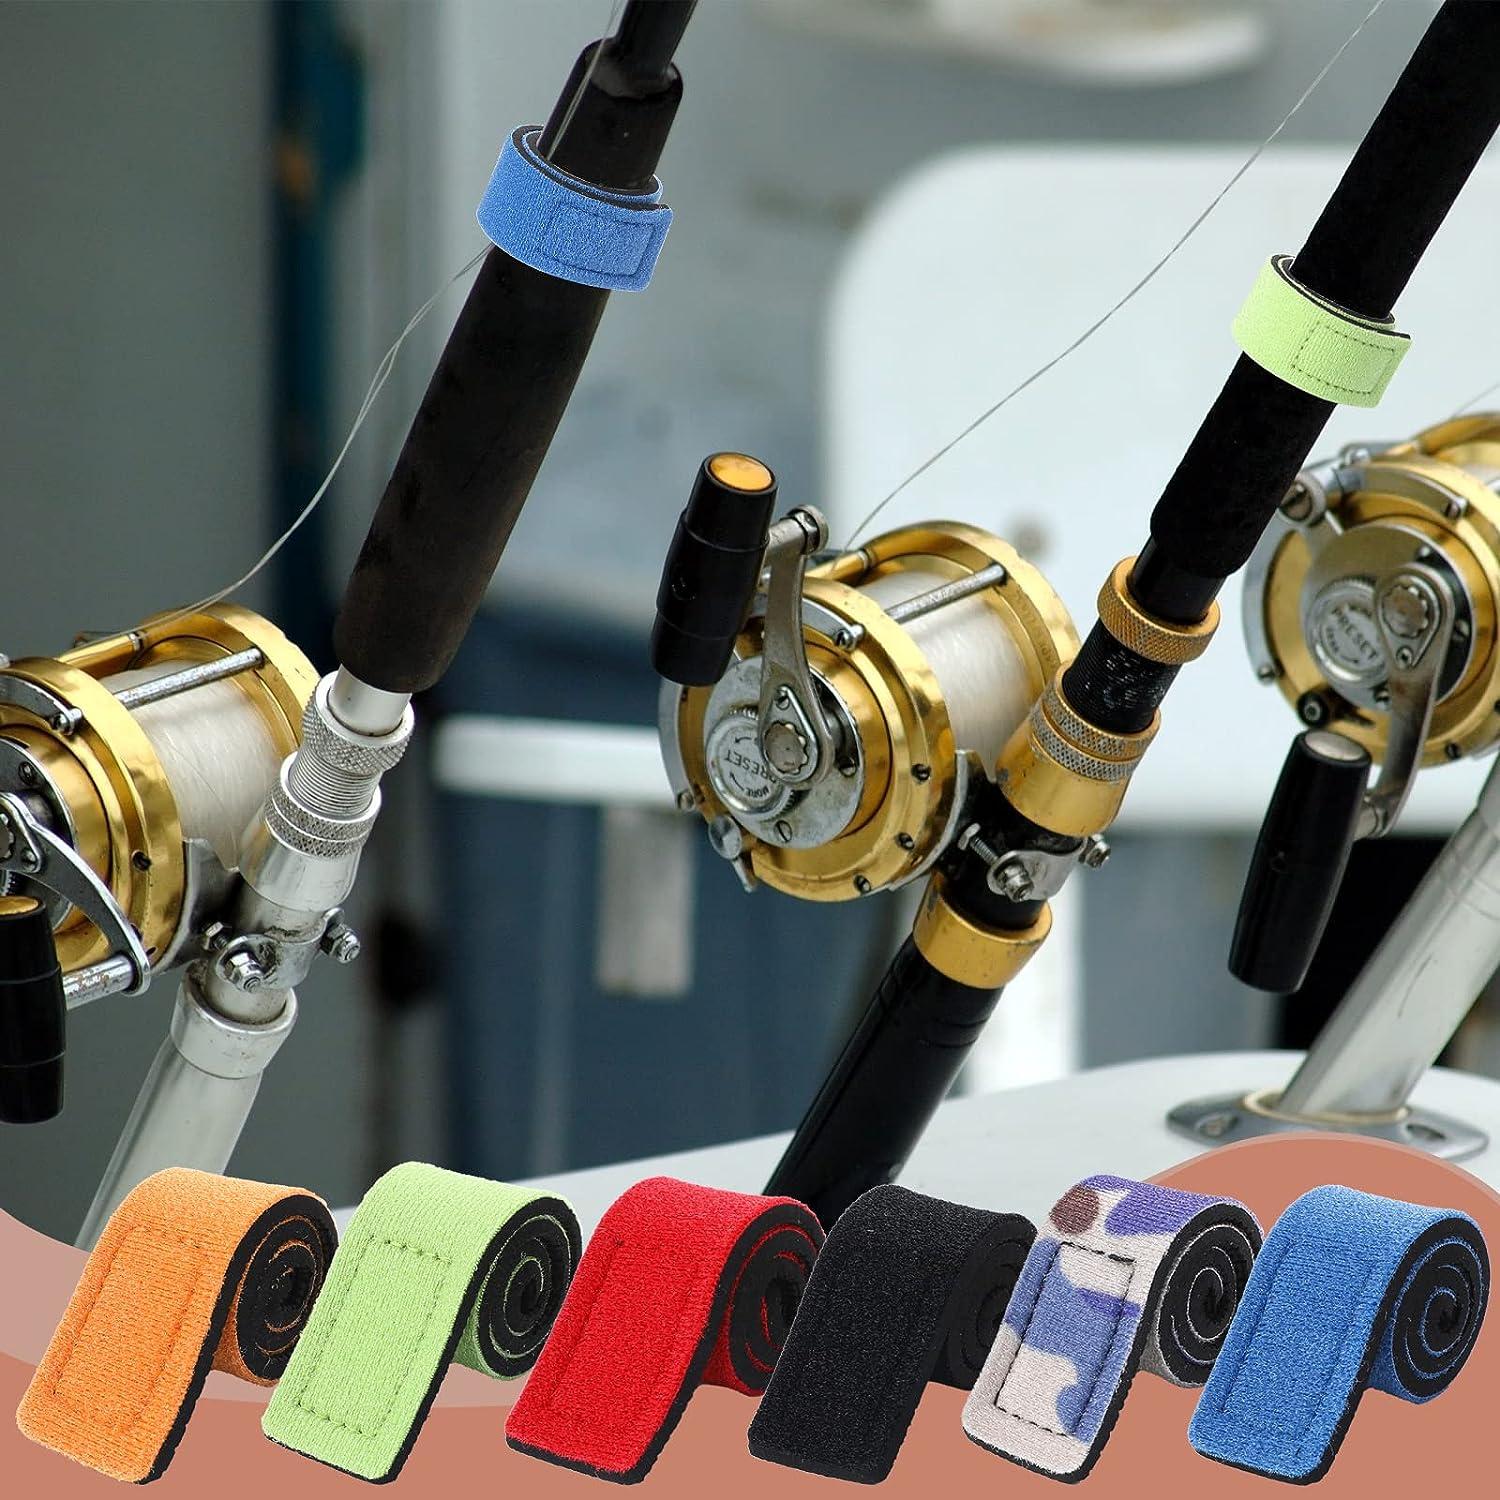 10pcs Fishing Rod Strap fishing rod wrap fishing rod supplies Casting Rods  Safety Strap Rods Straps Holders Fishing Pole Tie Fishing Rod Handle strap